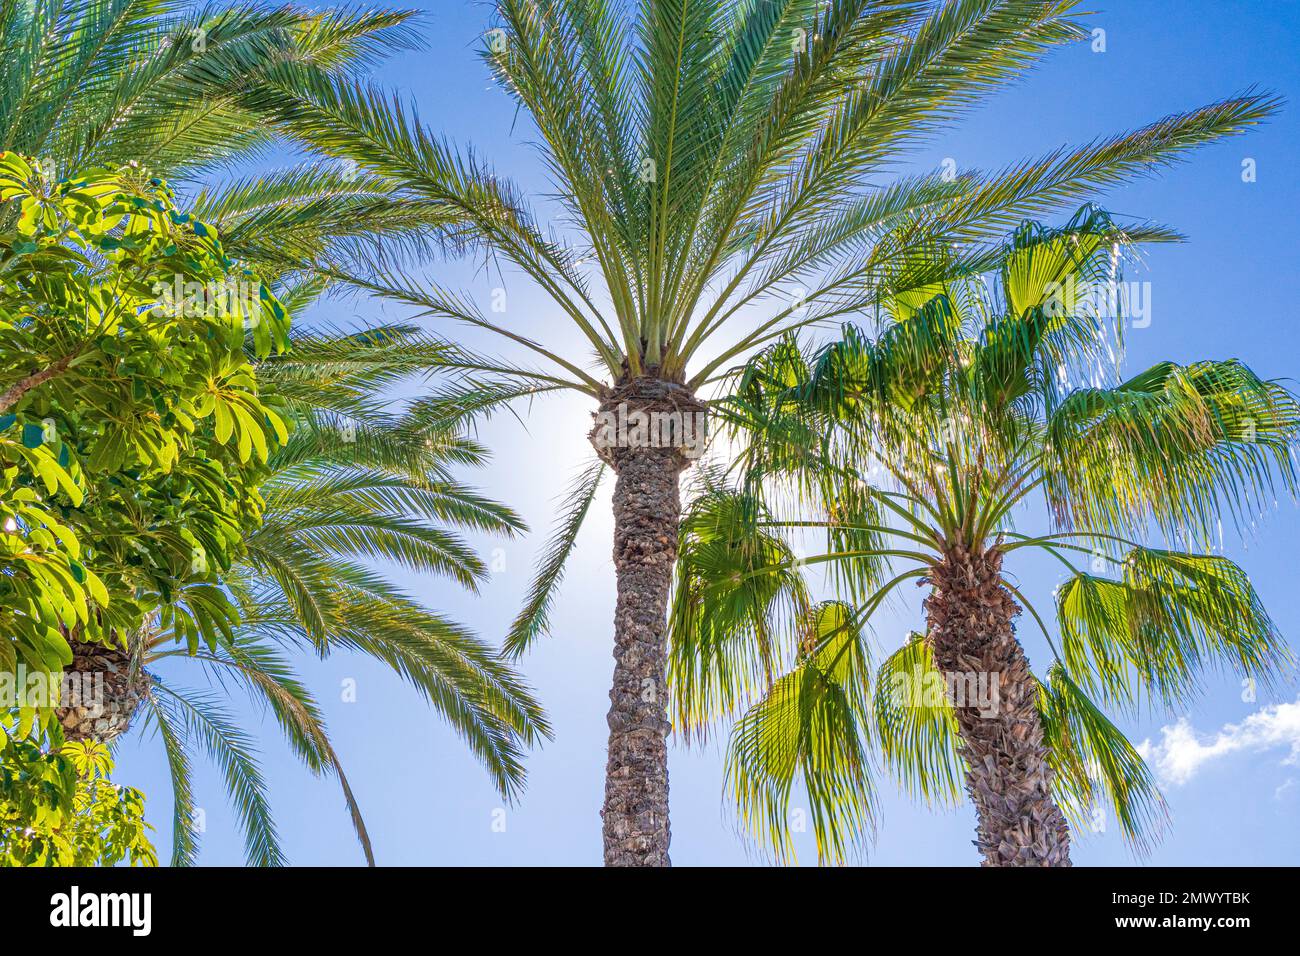 Palm trees backlit by the sun on the Canary Island of Fuerteventura, Spain Stock Photo